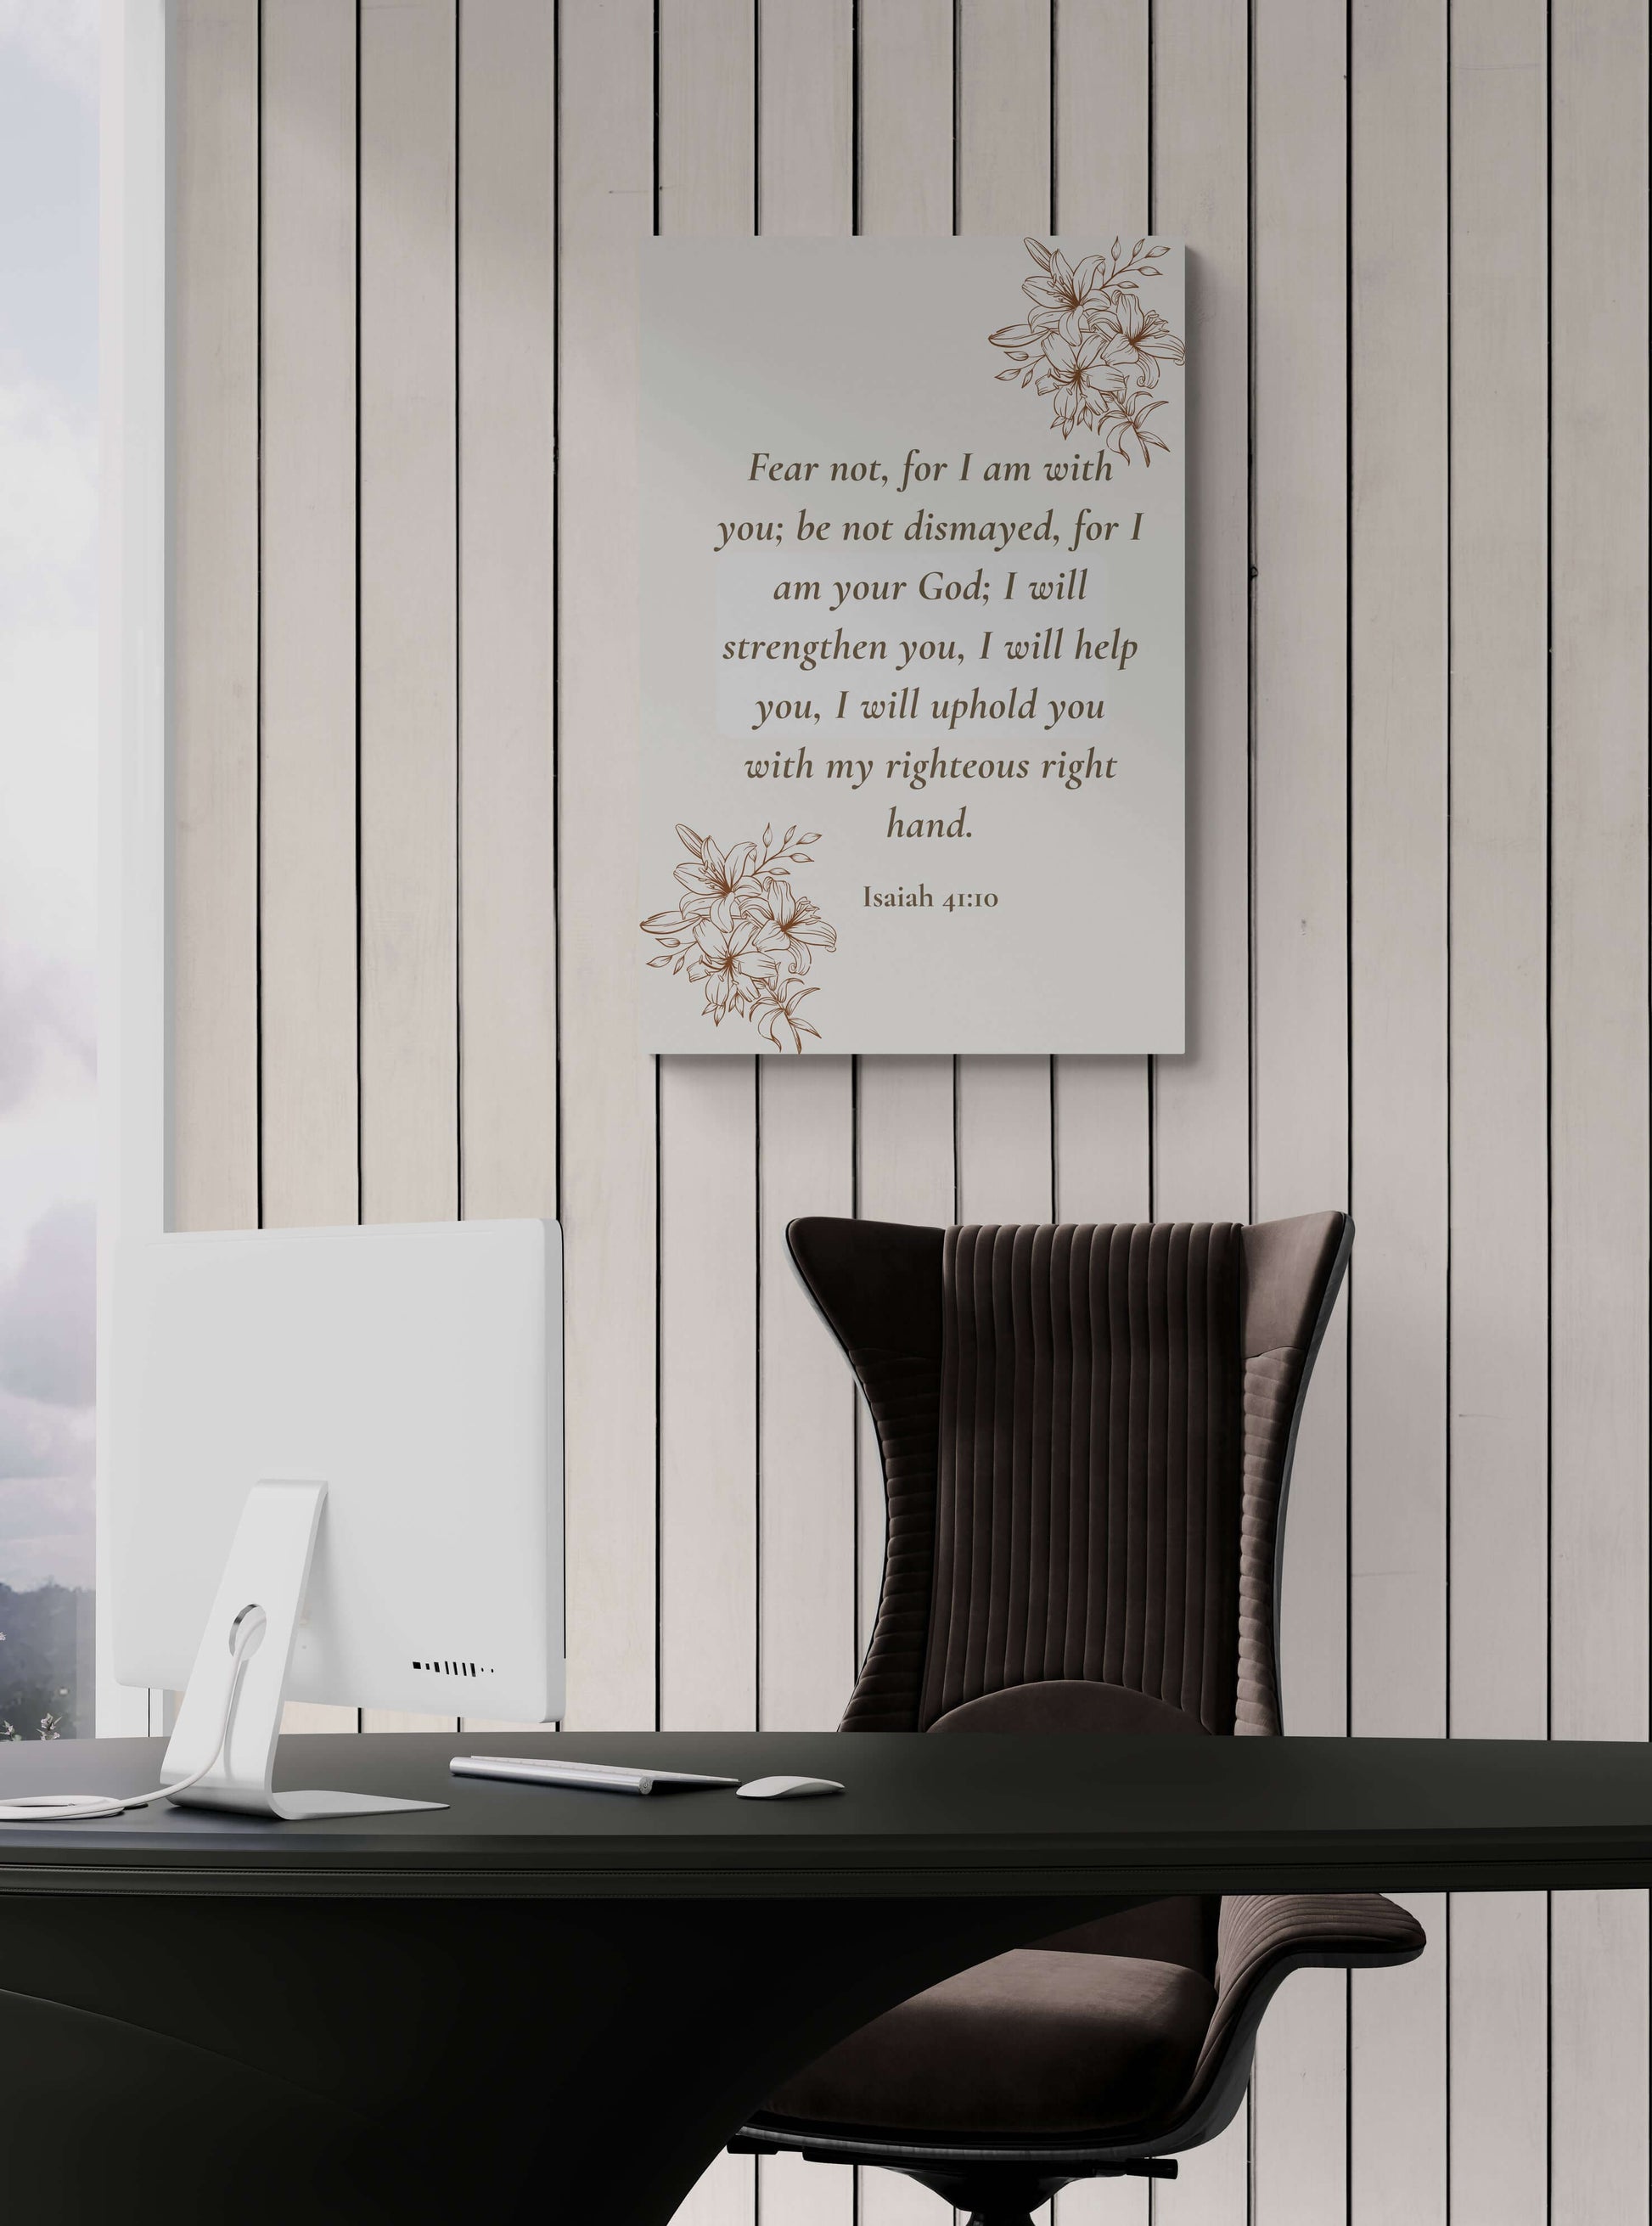 Minimalist Wall Decor: Acrylic Print with Uplifting Scripture | Art & Wall Decor,Assembled in the USA,Assembled in USA,Decor,Home & Living,Home Decor,Indoor,Made in the USA,Made in USA,Poster